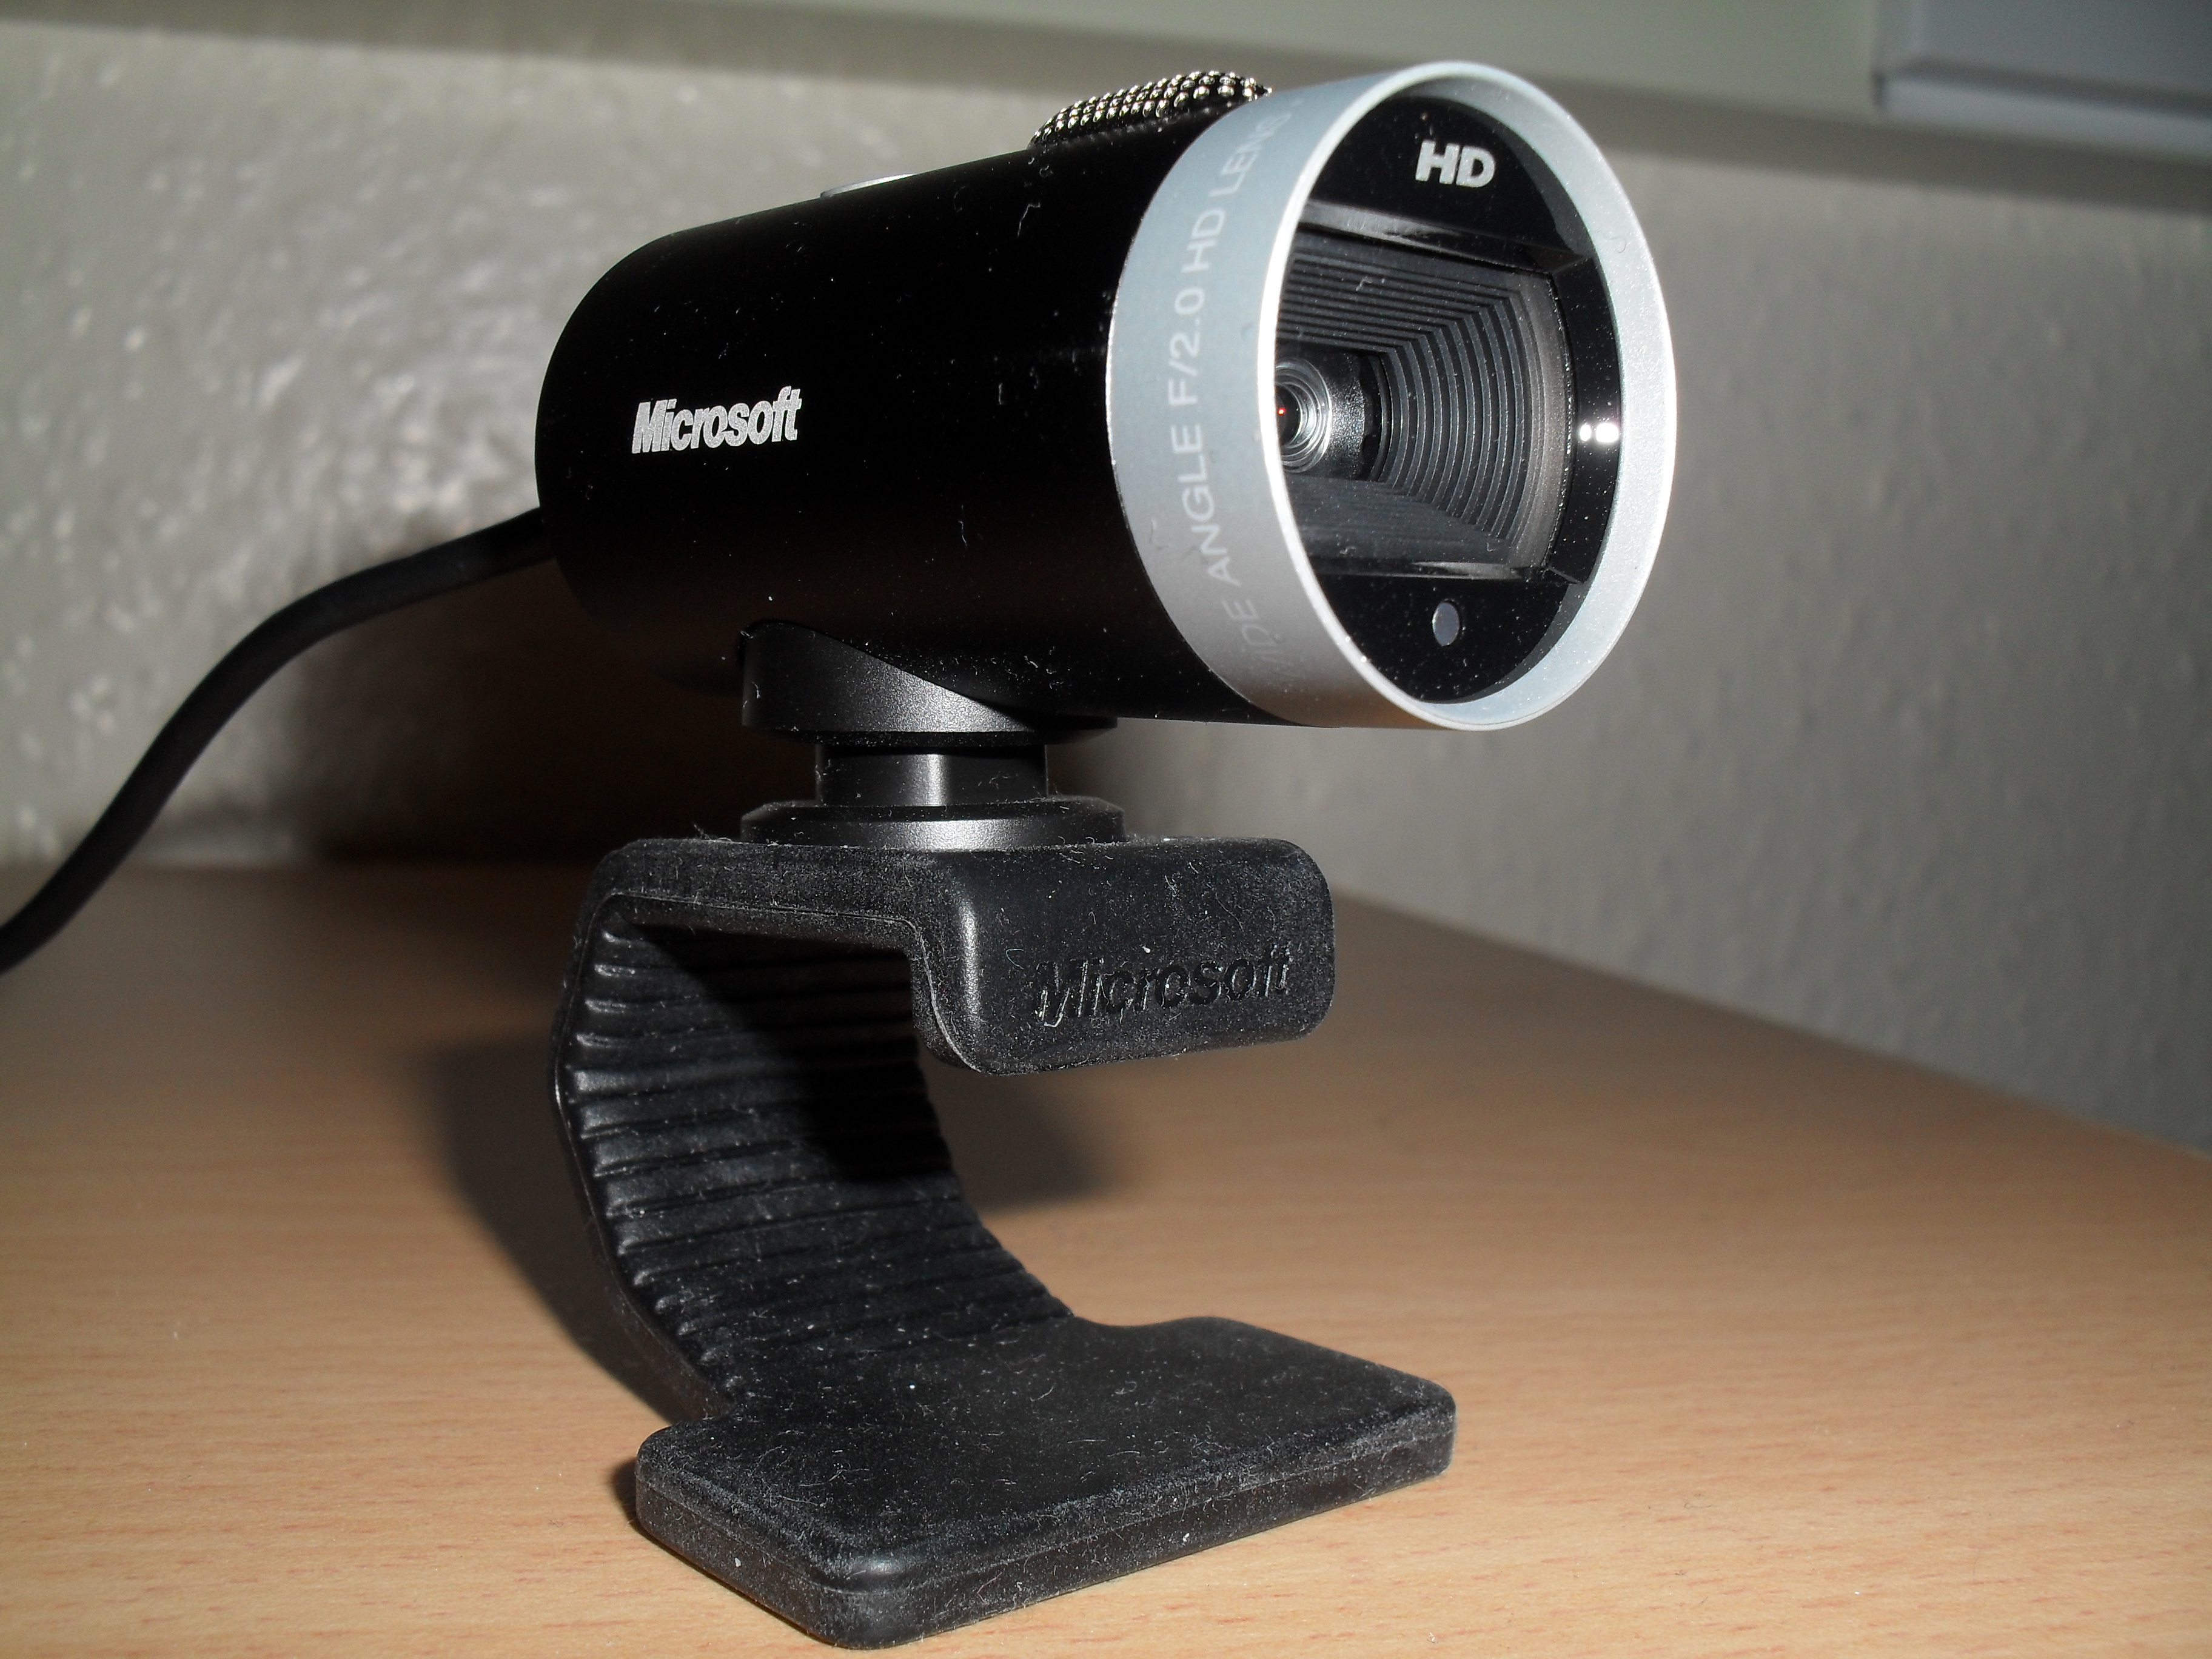 This webcam, to my delight, turned out to be a Microsoft LifeCam Cinema. 